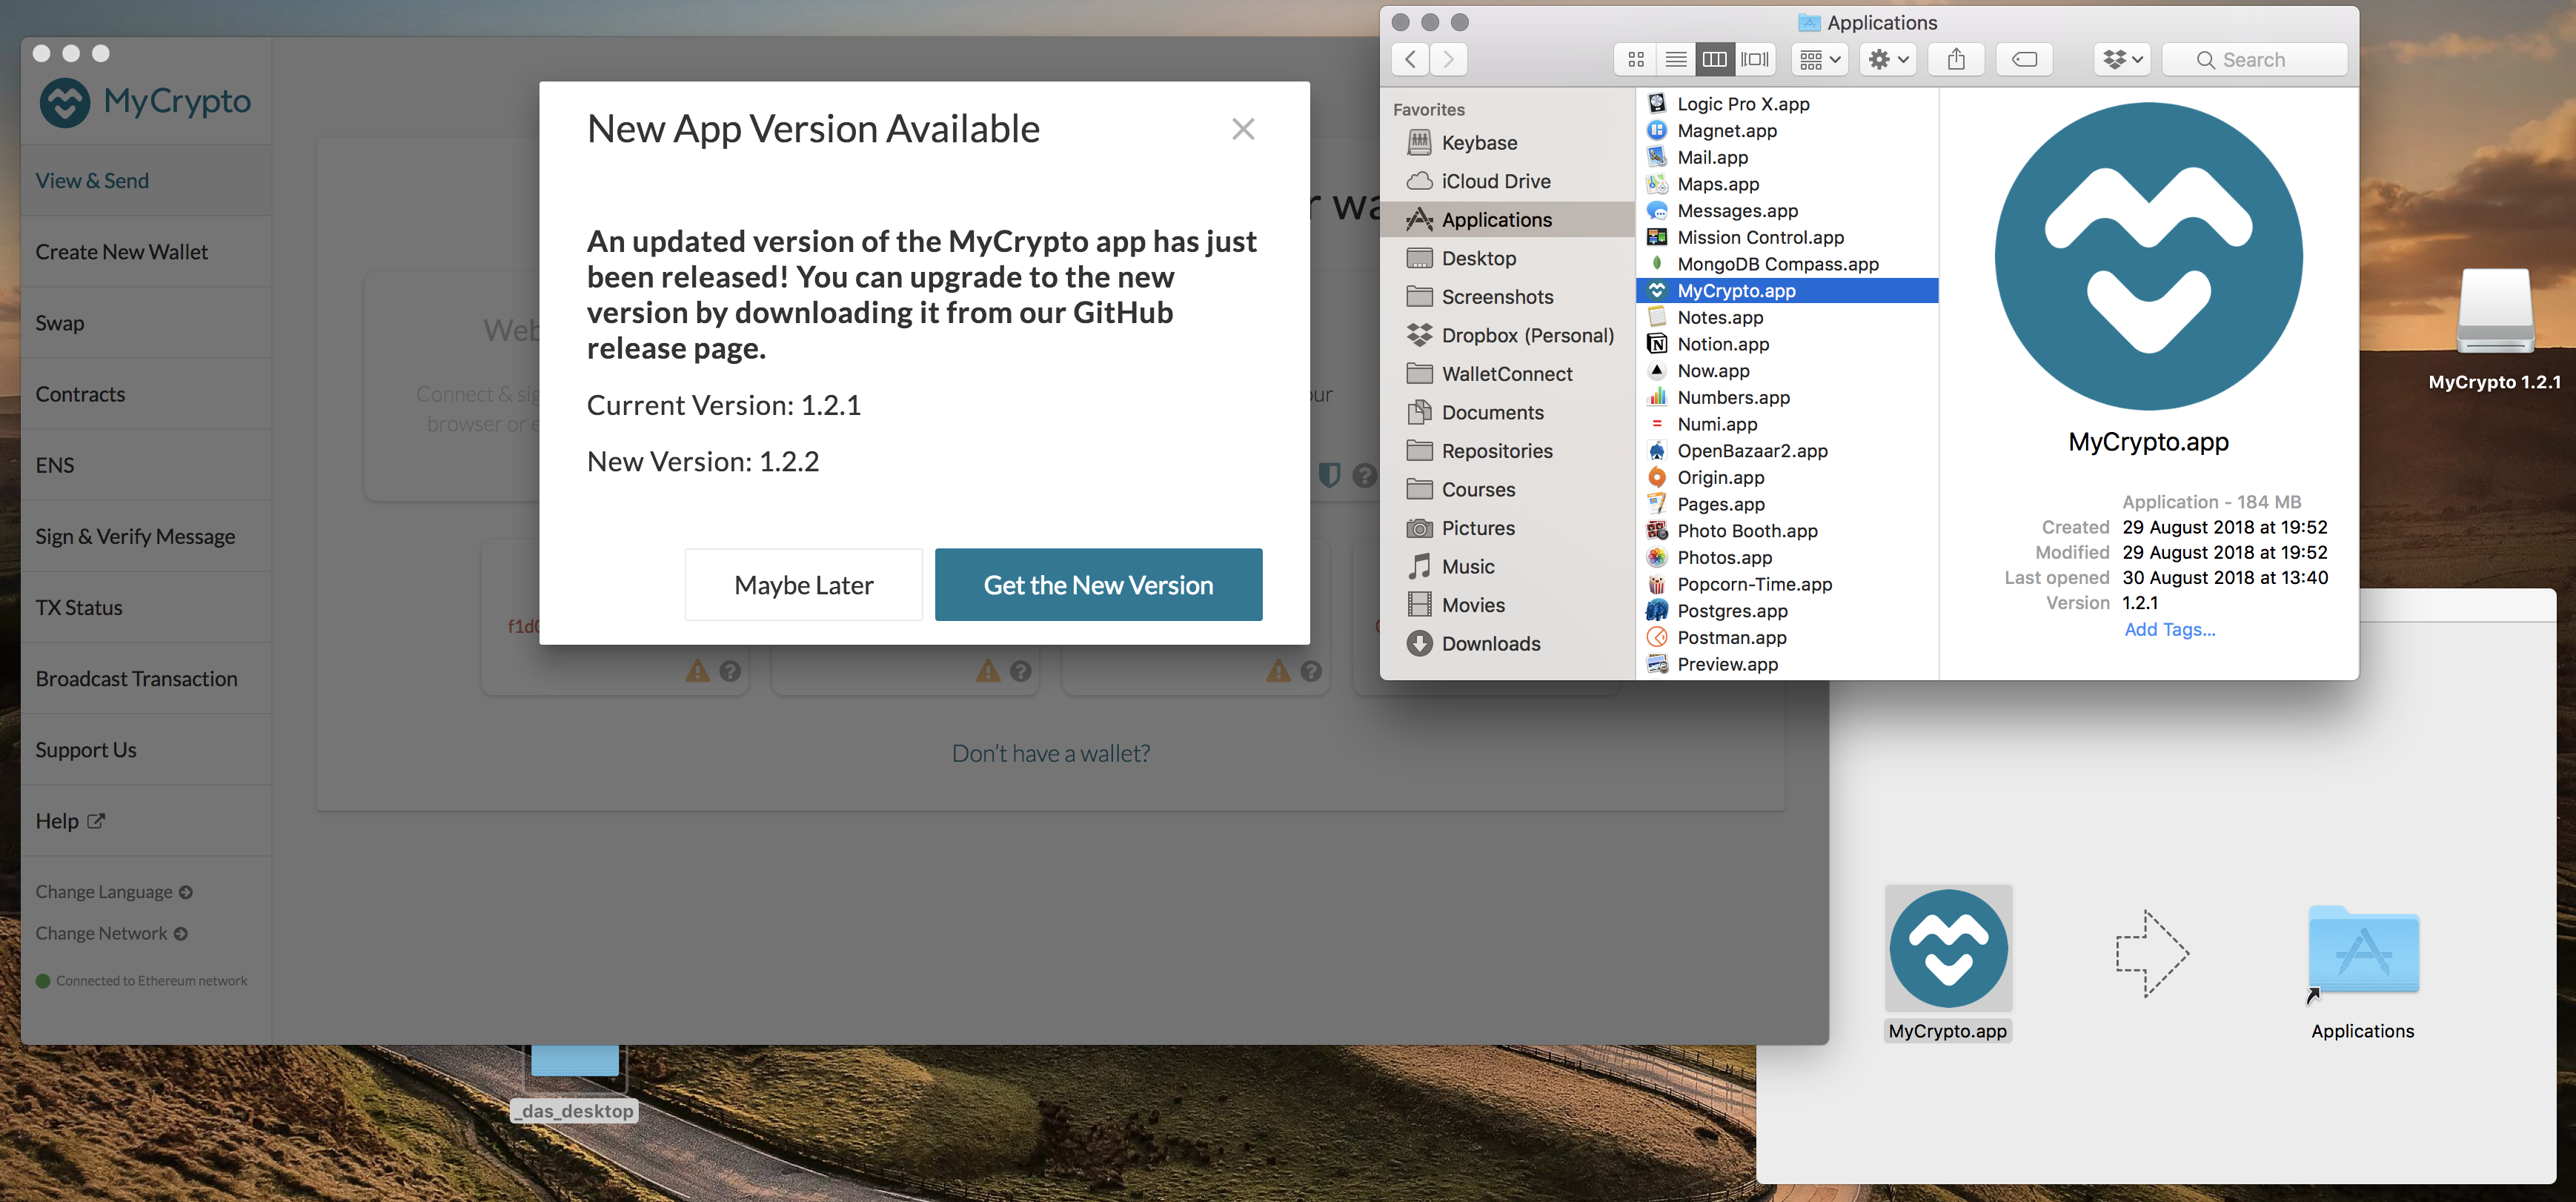 for mac os x 10.12 should i download zip or gz>